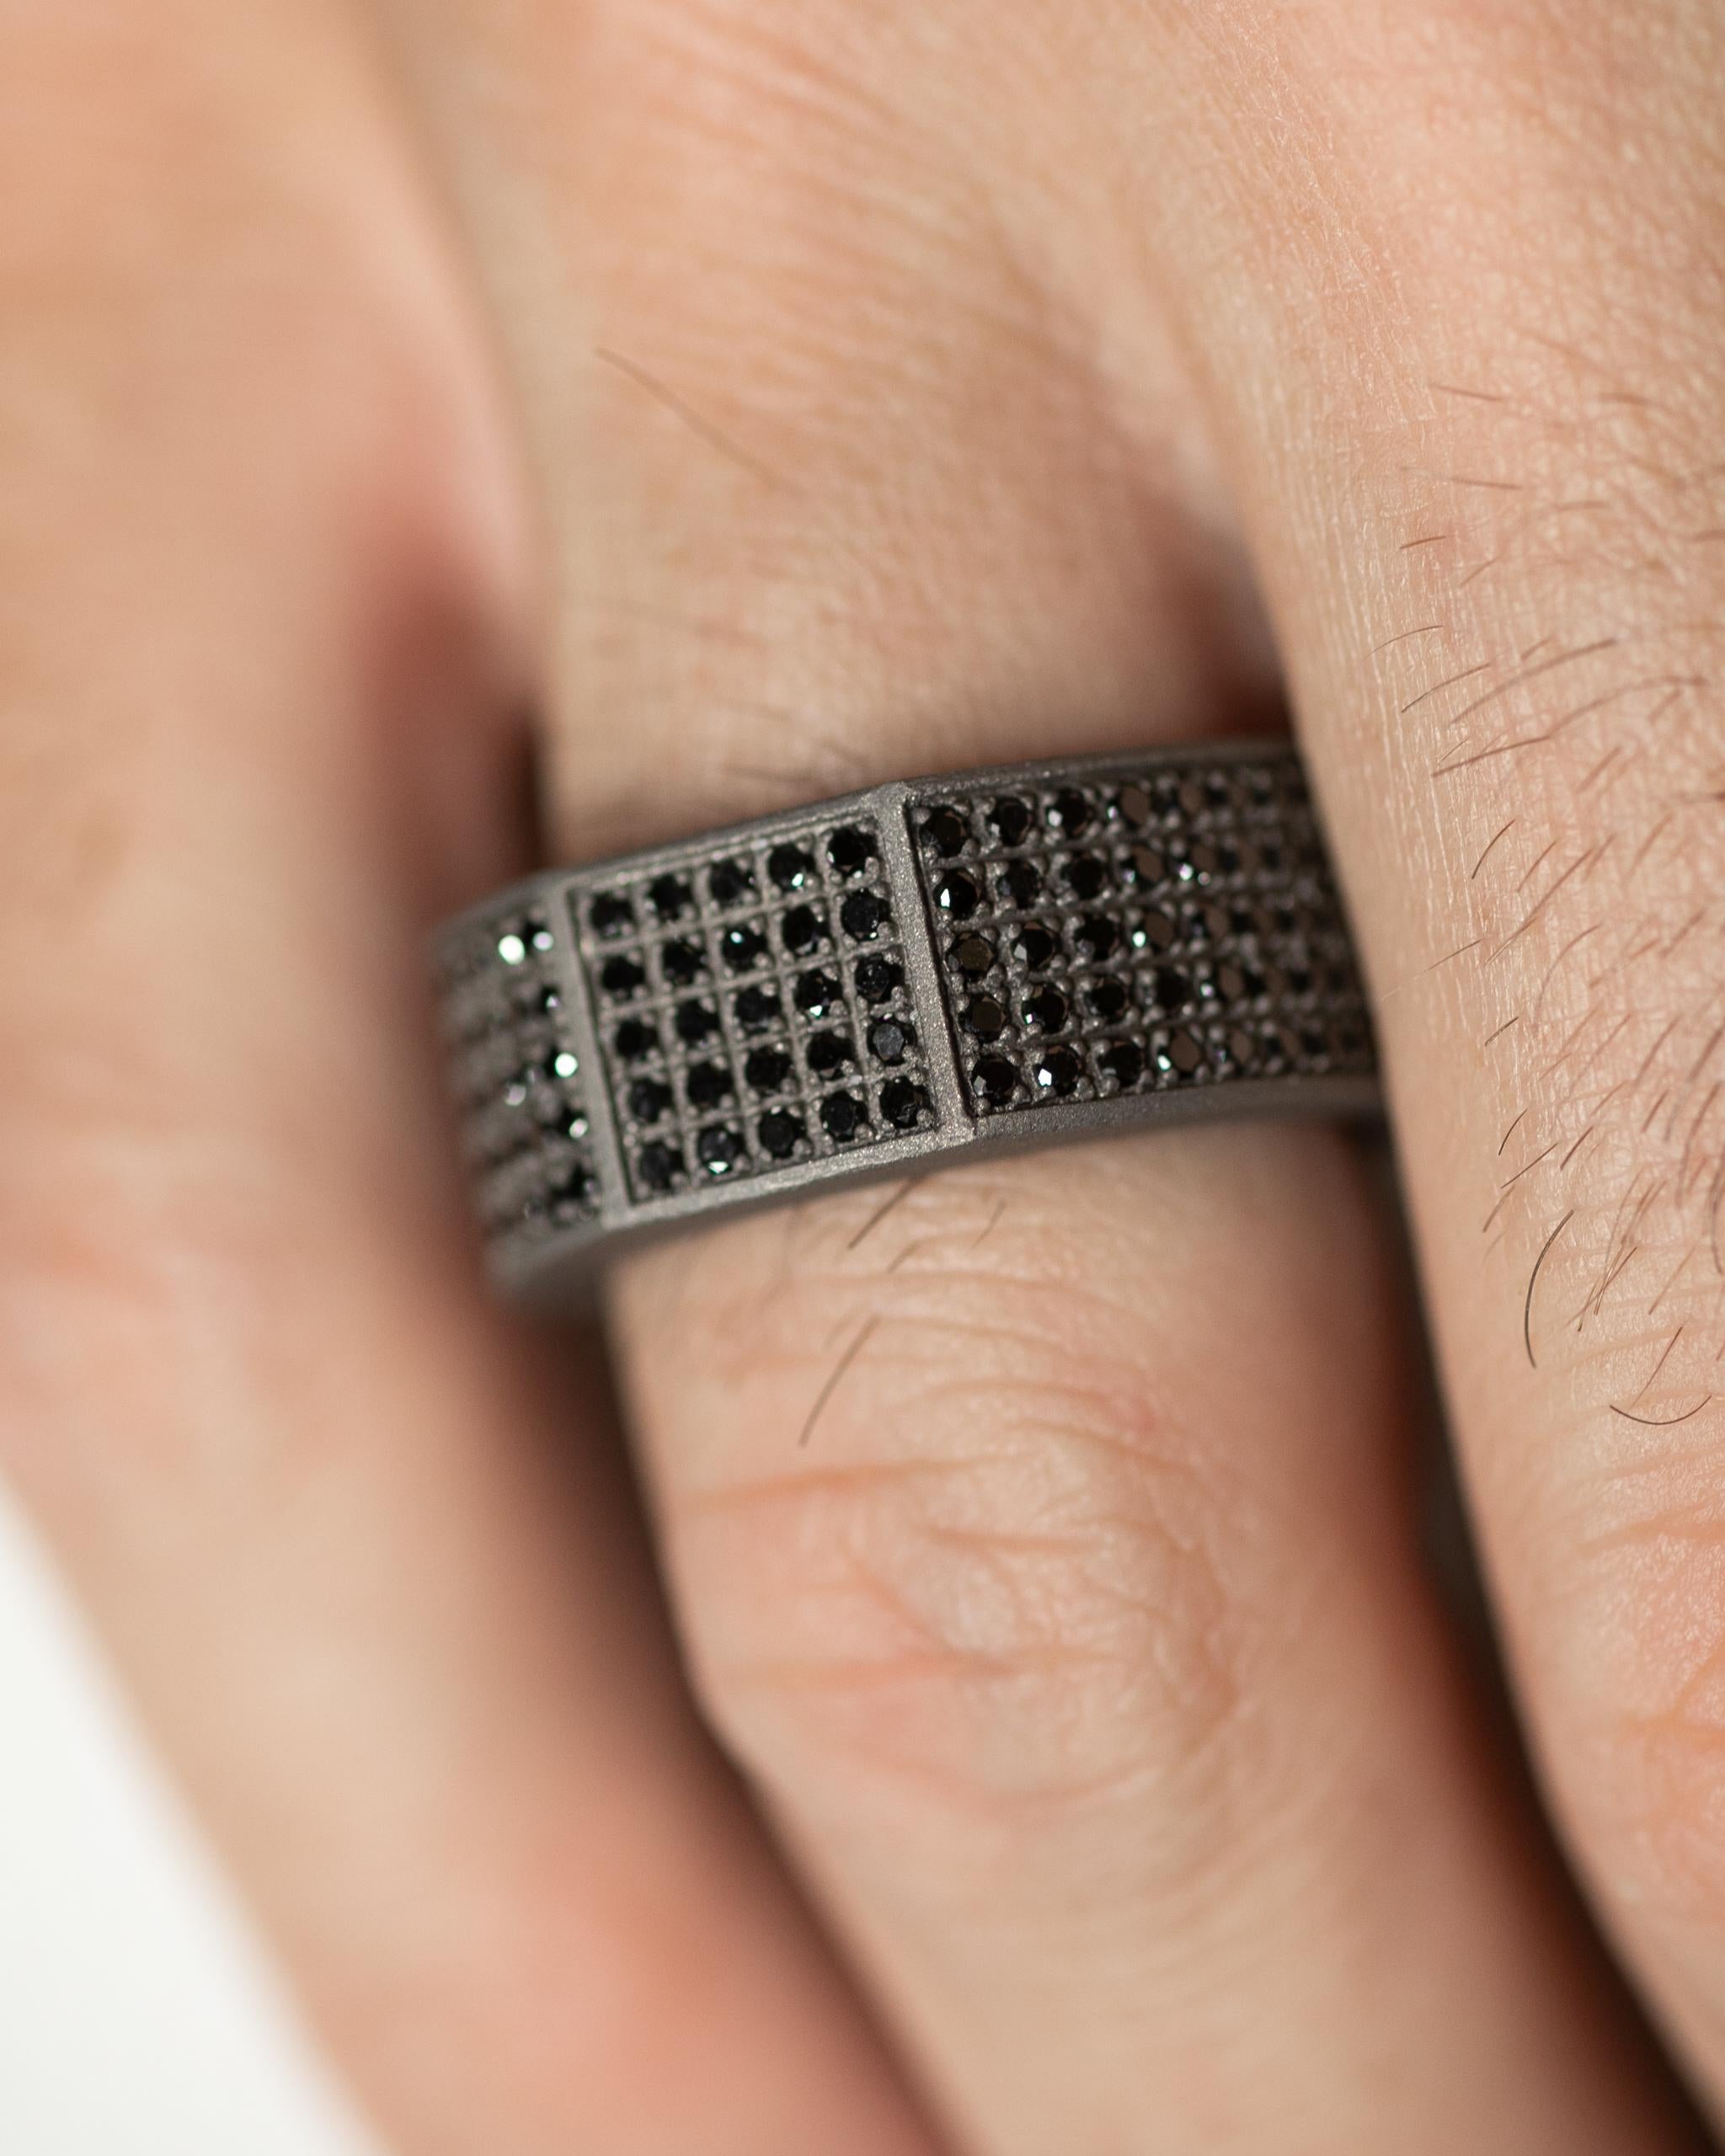 Crafted with precision and elegance, this Titanium Band Ring has been made with 225 natural black round diamonds, totaling a stunning 2.25 Carats. The band measures 1cm in width, making a unique combination of sophistication and masculinity.
The